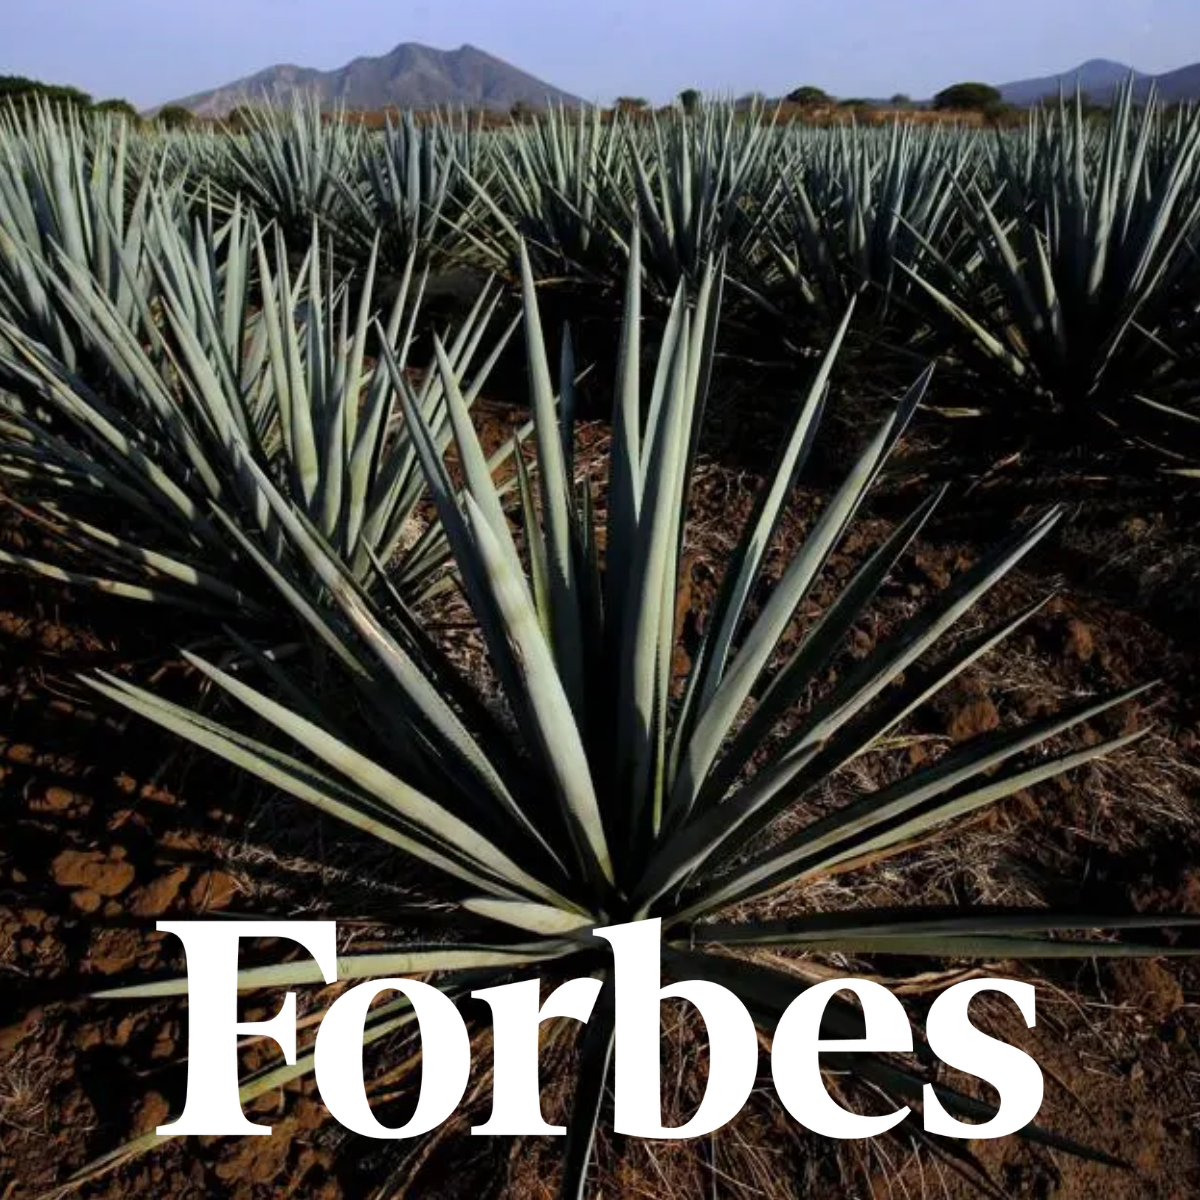 FORBES - The Best Tequilas In The World-According To The 2023 Ultimate Spirits Challenge